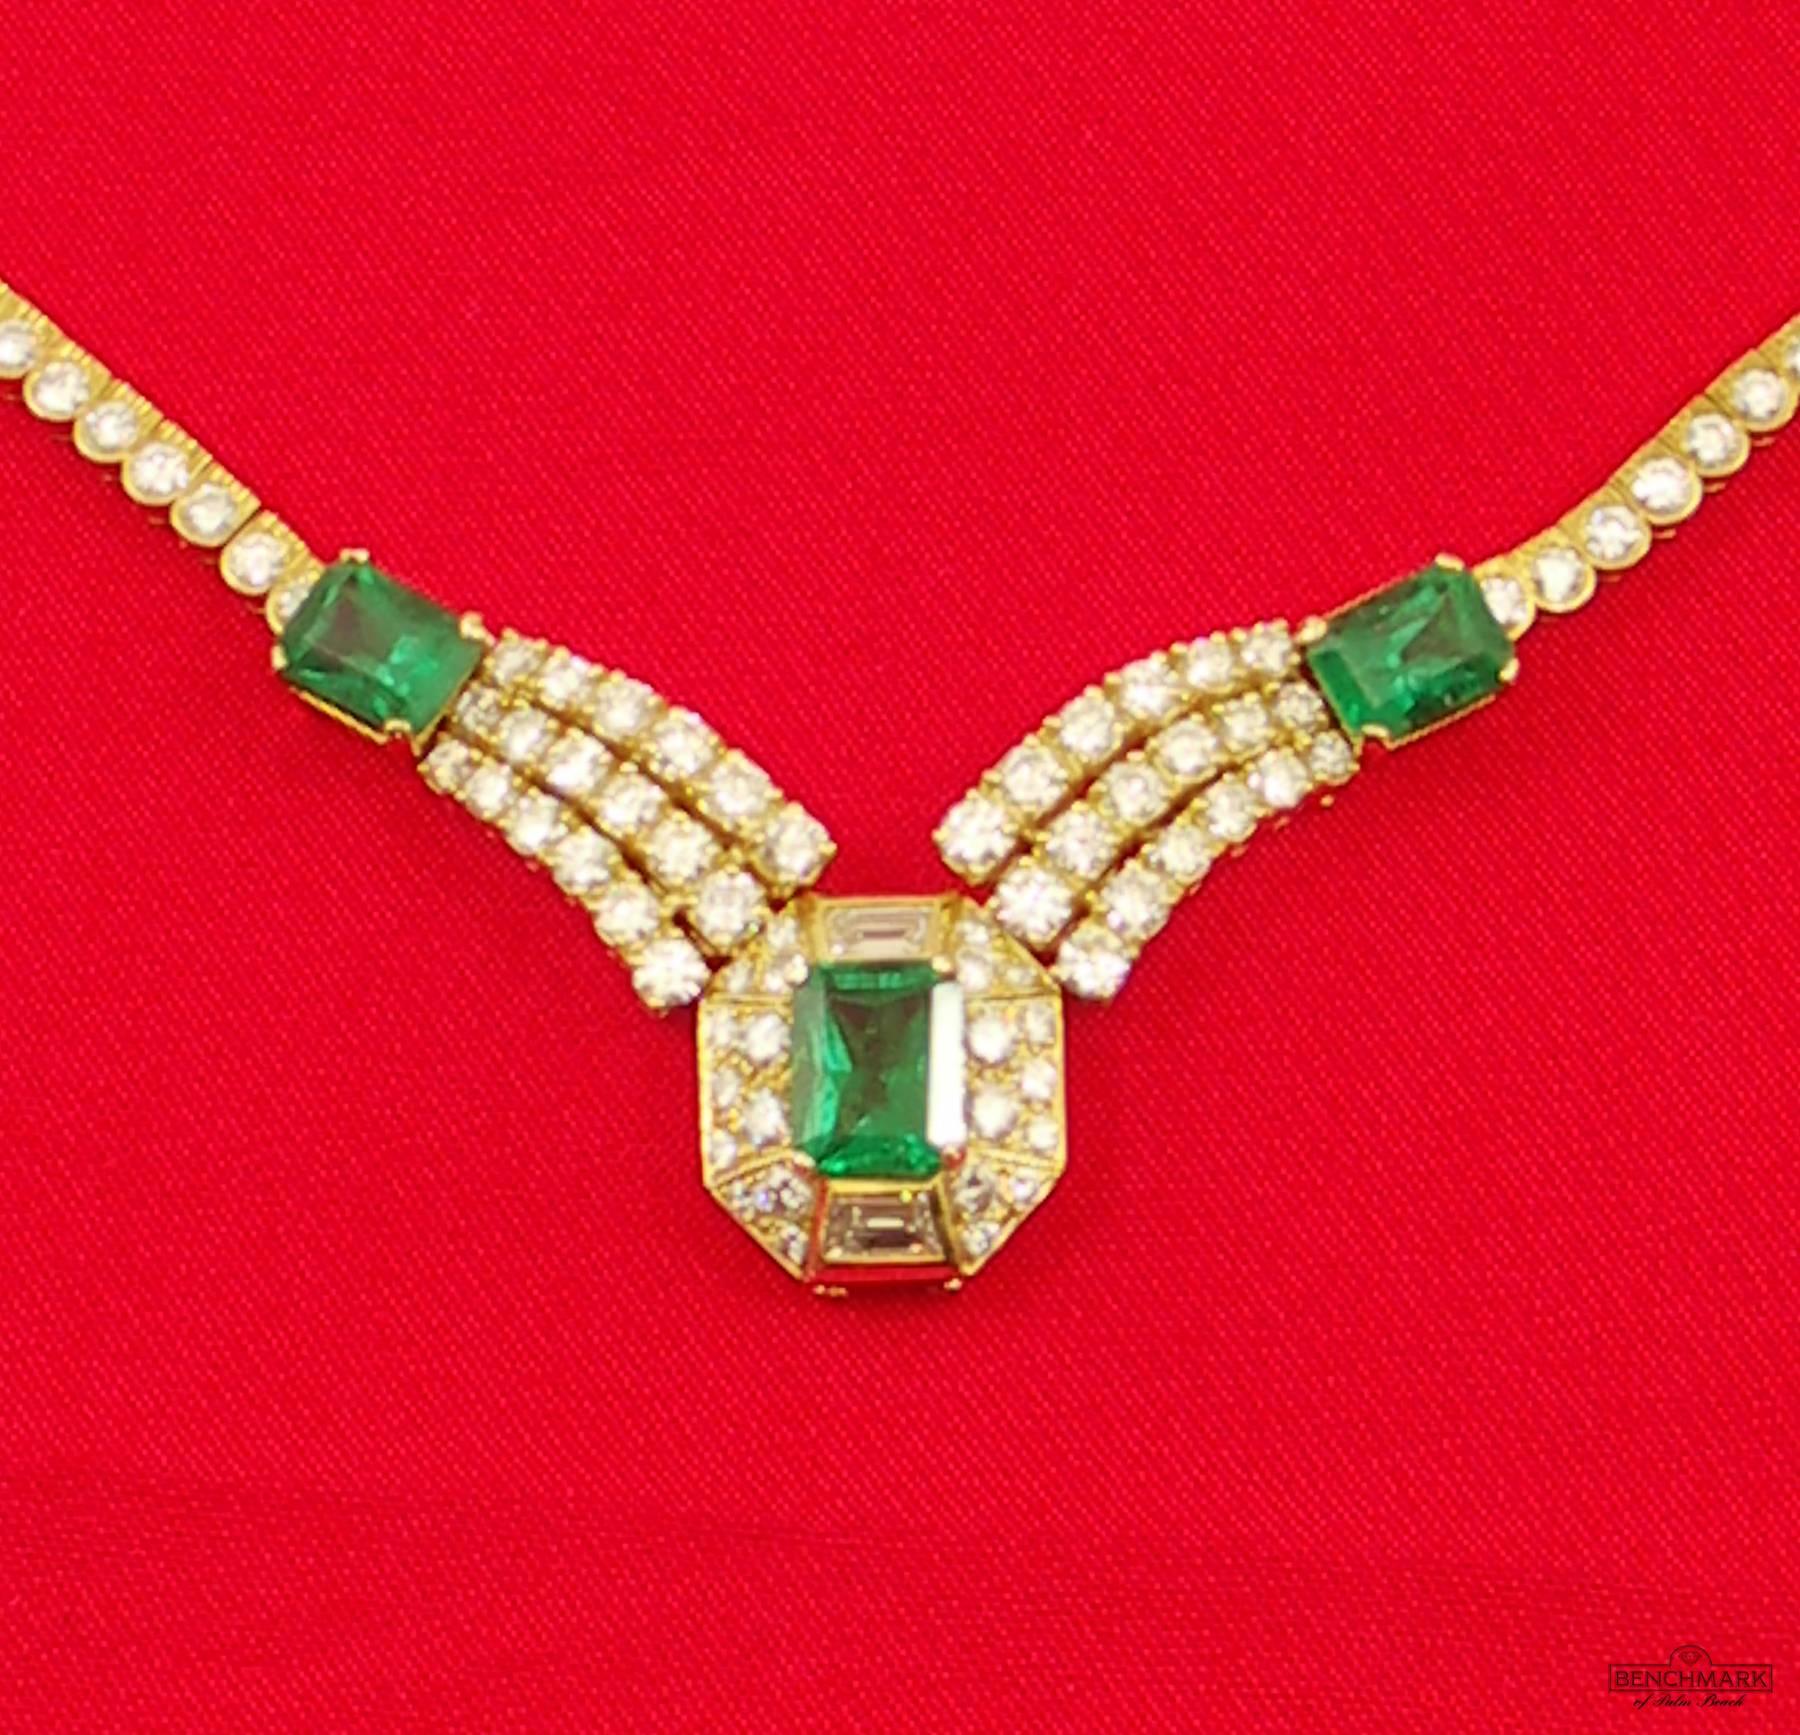 An 18 karat yellow gold necklace, centered around an emerald cut emerald weighing 3.38ct, as described in A.G.L. certificate #1088611, as being of Zambian origin, and absent of enhancements. Surrounded by 22 round brilliant cut diamonds weighing